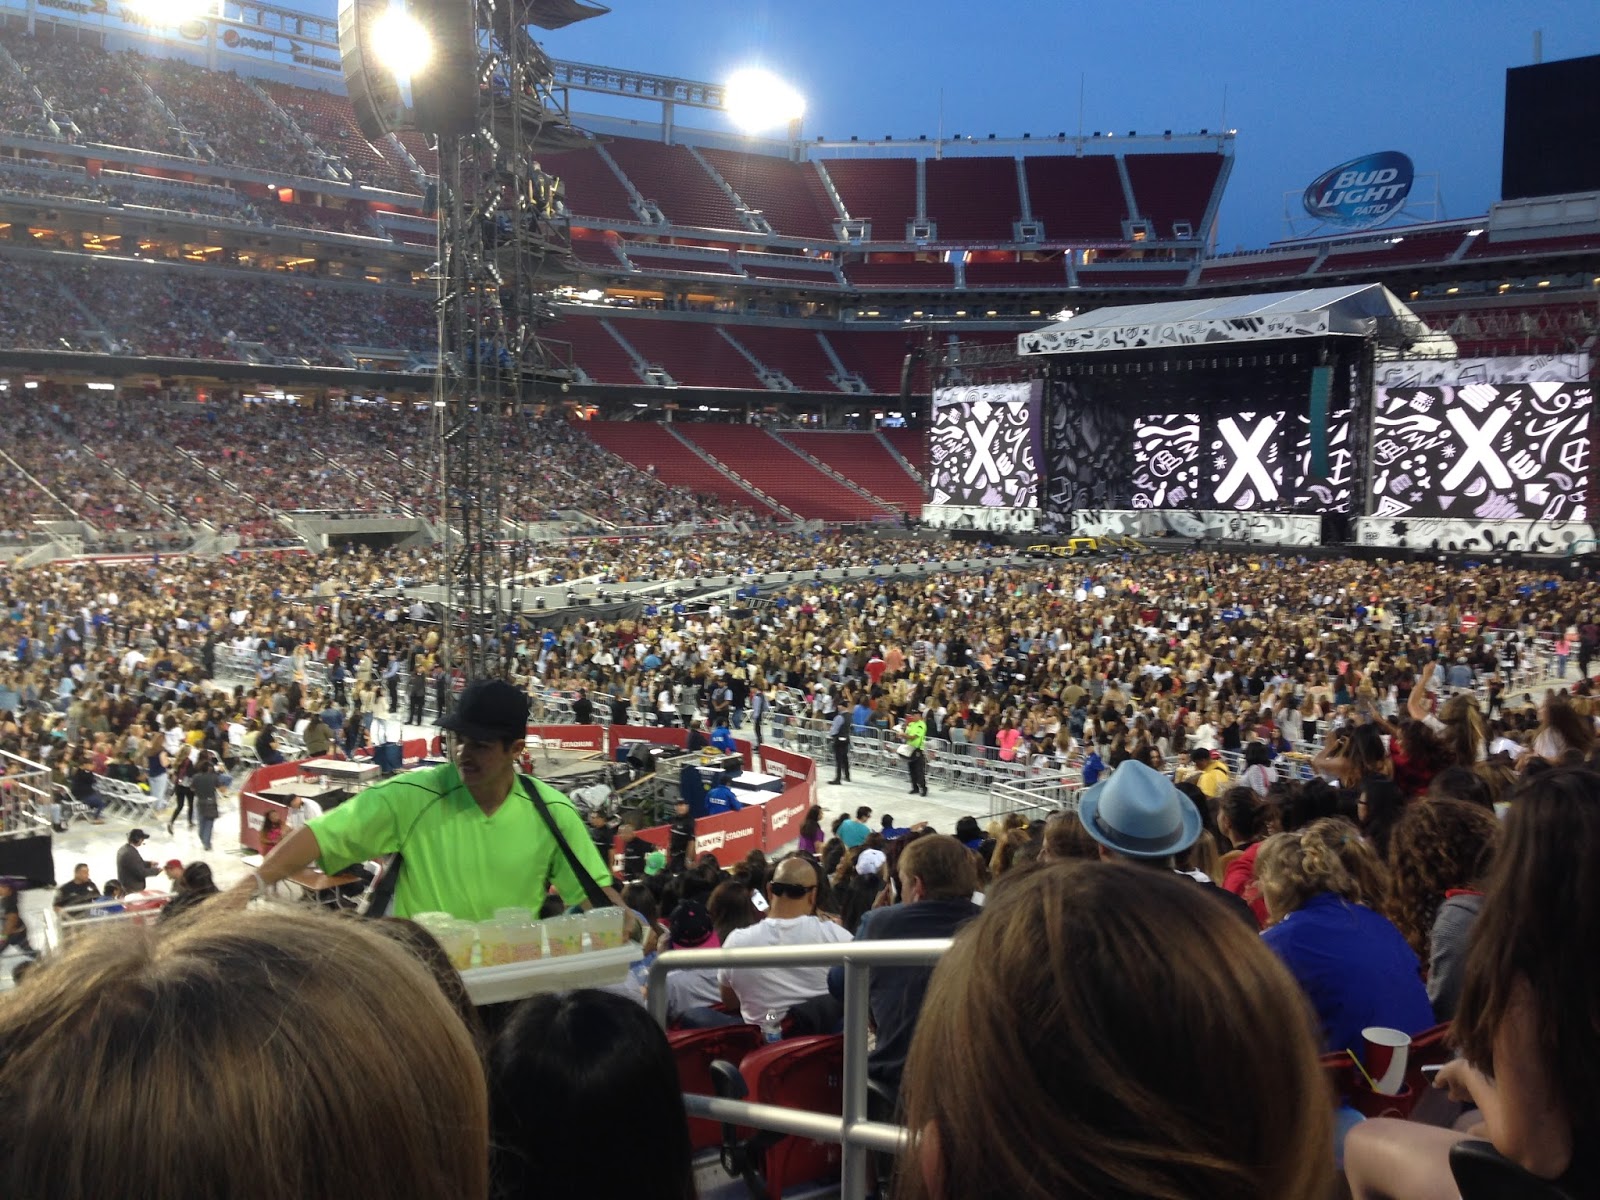 thecaitlynlee: My One Direction Concert Experience!